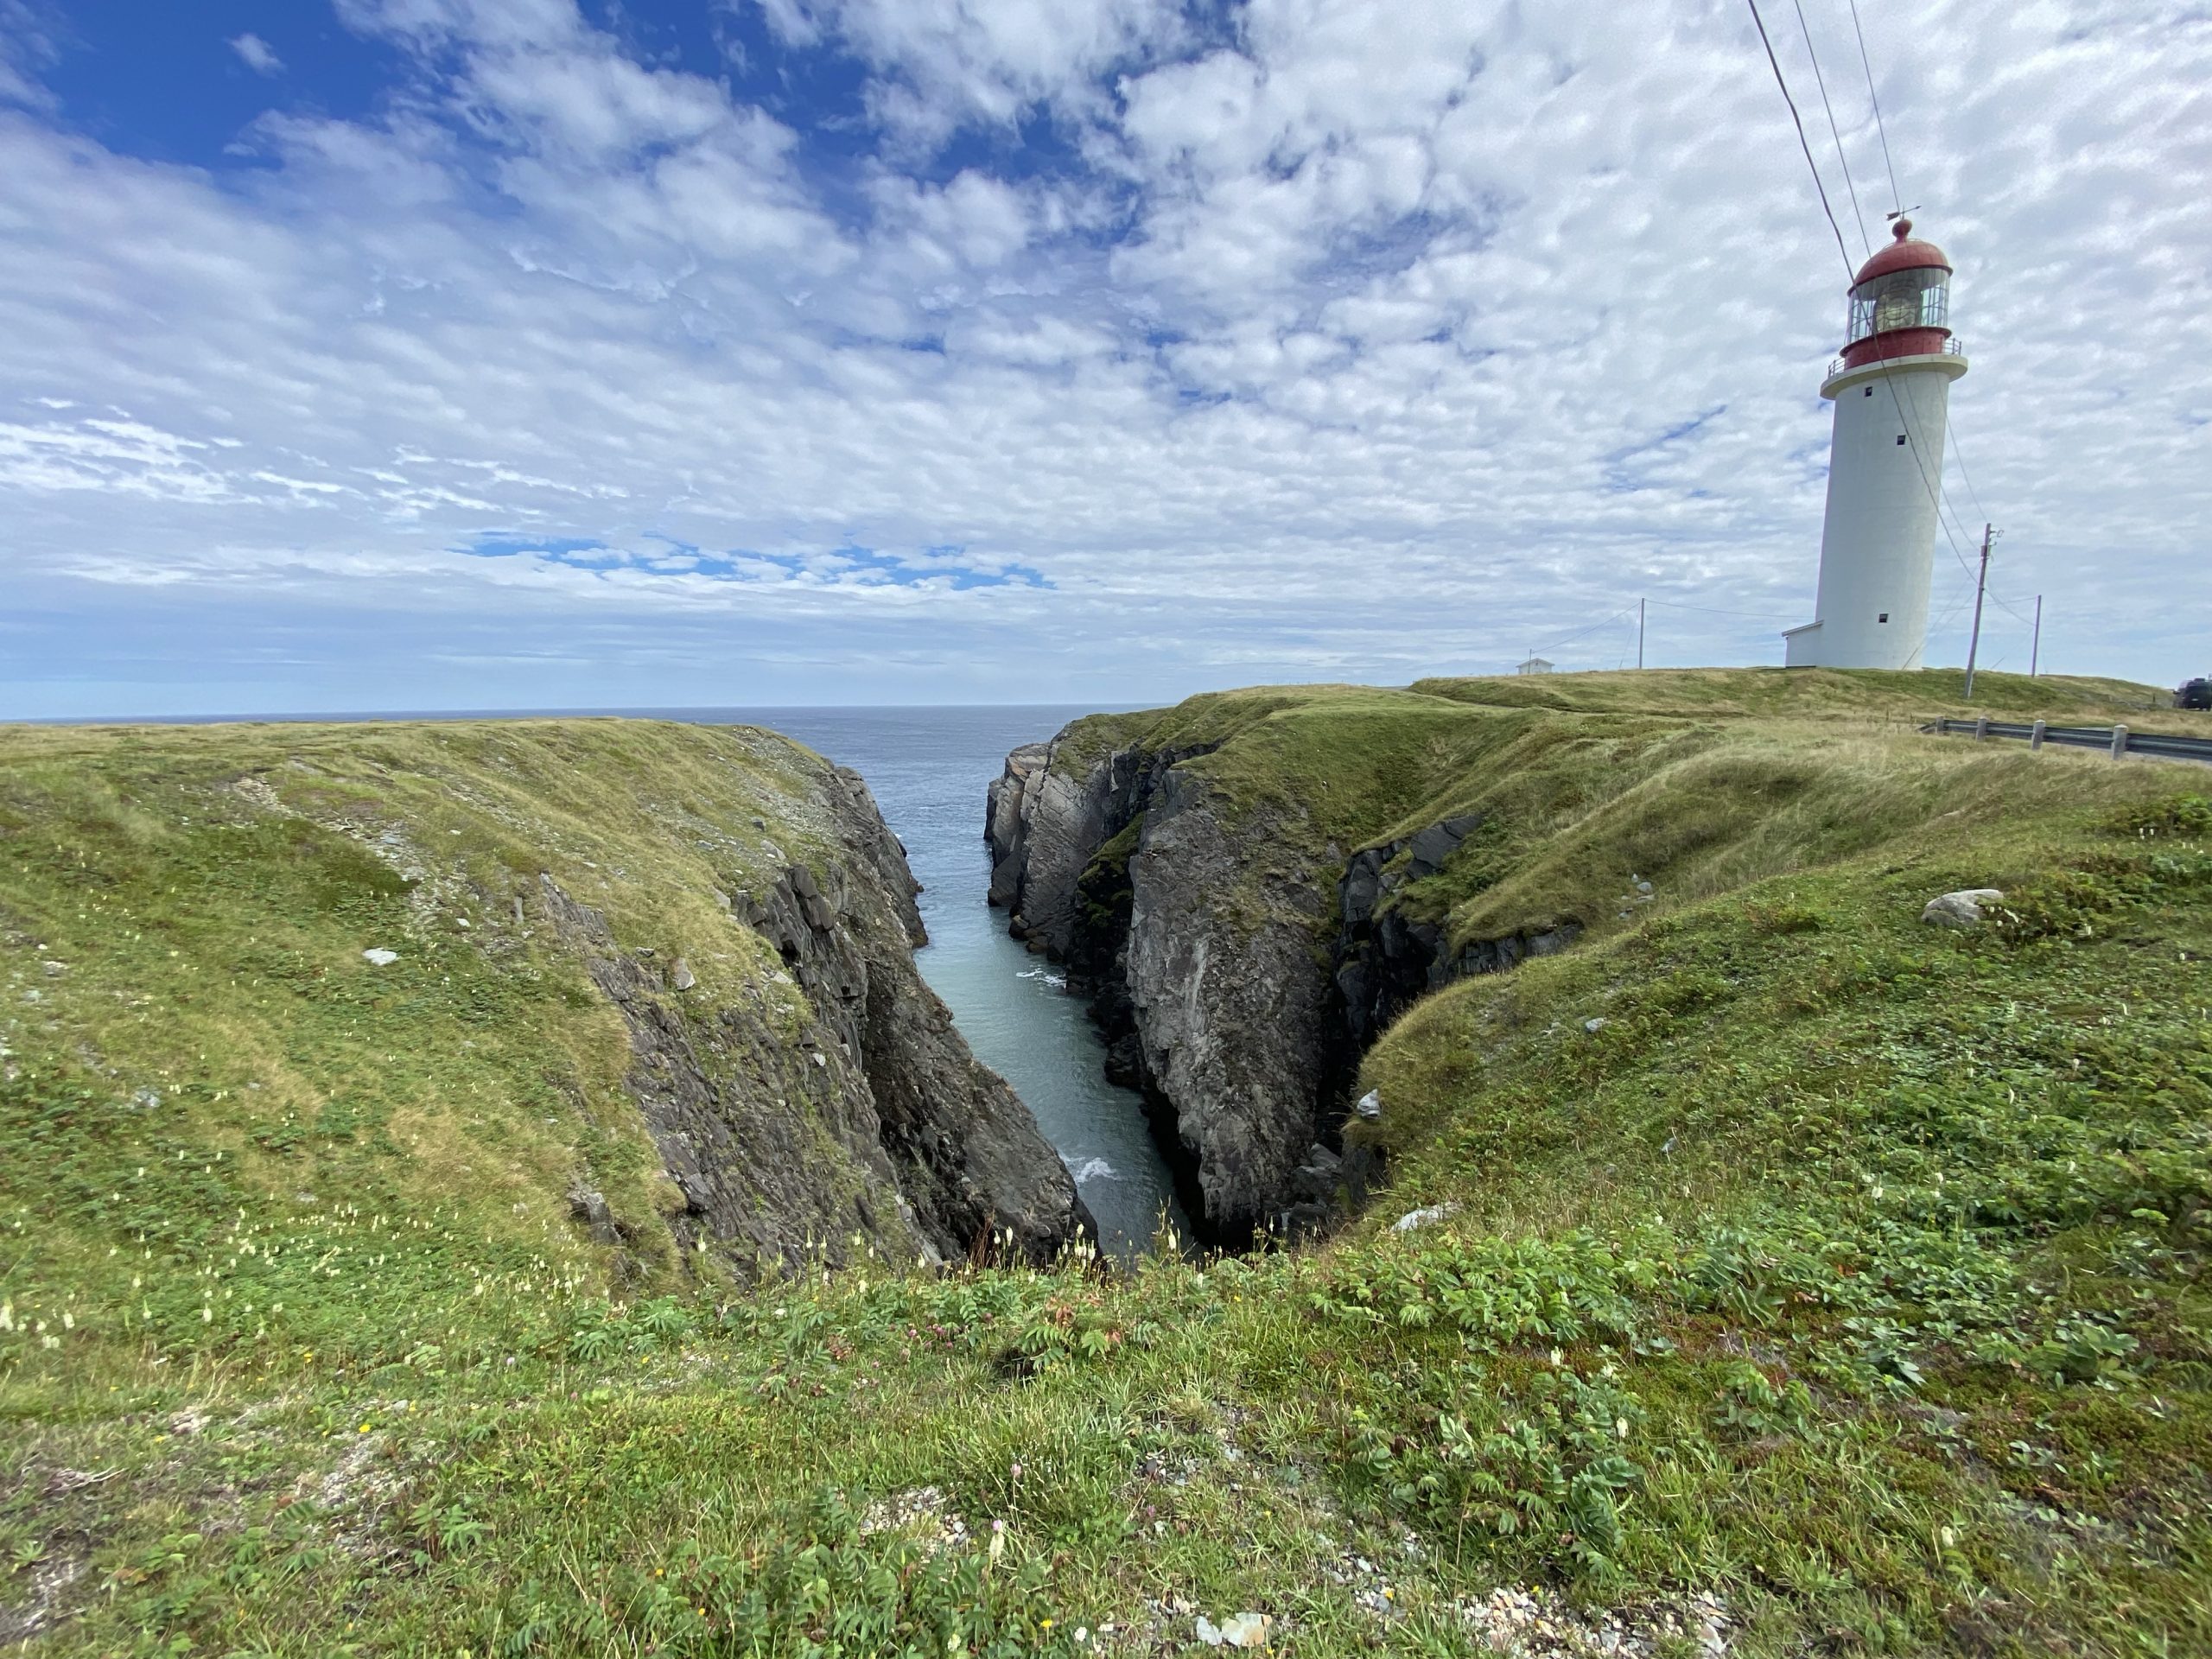 A very deep and narrow inlet practically in the shadow of the Cape Race lighthouse in Newfoundland.